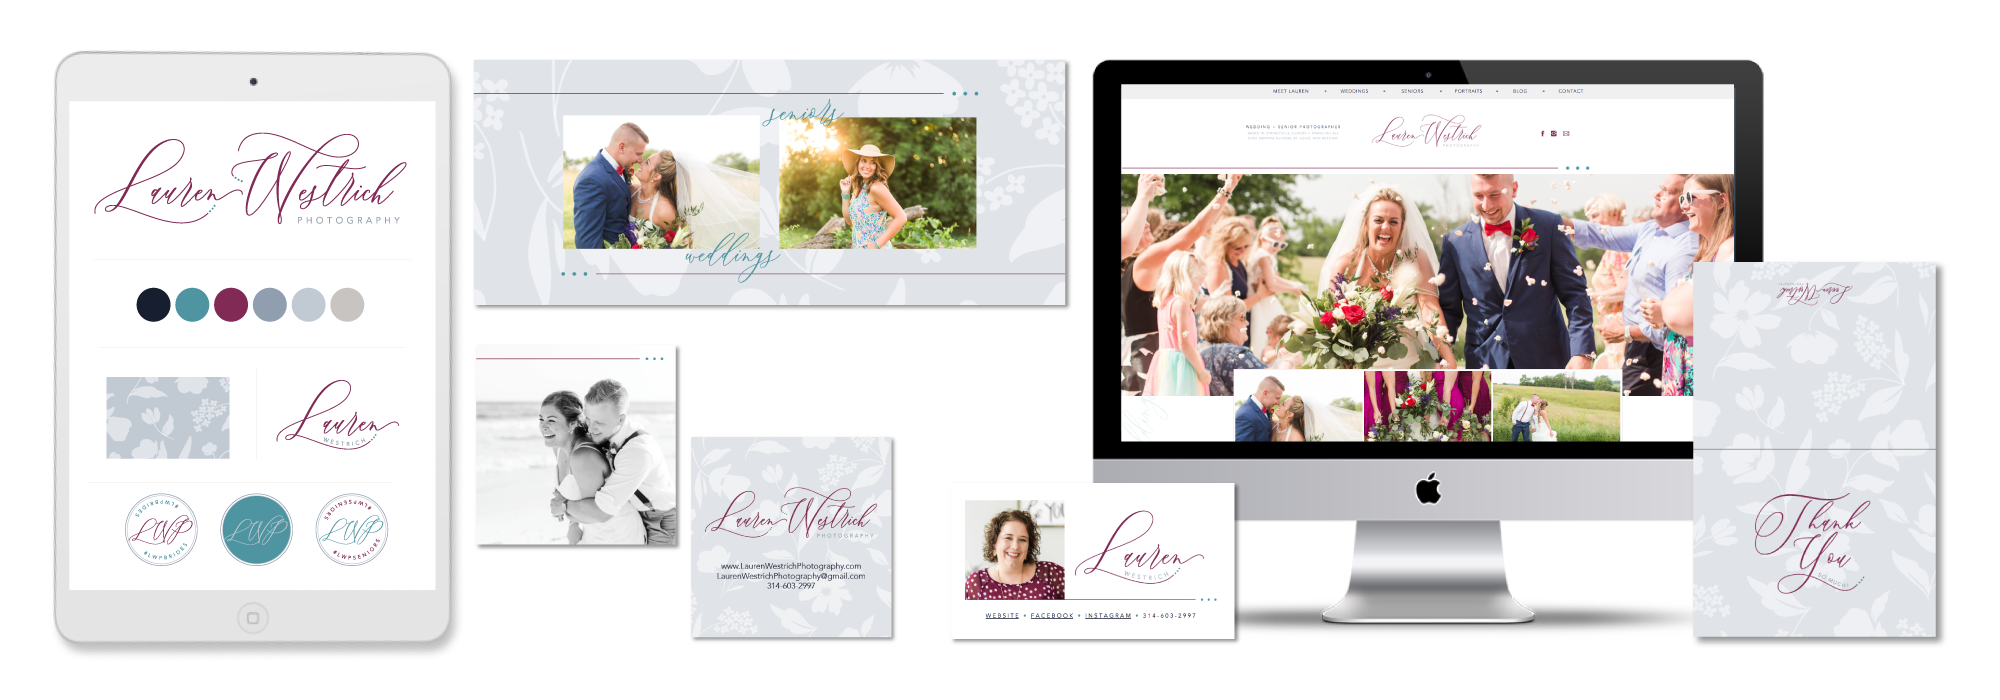 This is a joyful and simple inspired brand design portfolio and Showit web design for Lauren Westrich Photography